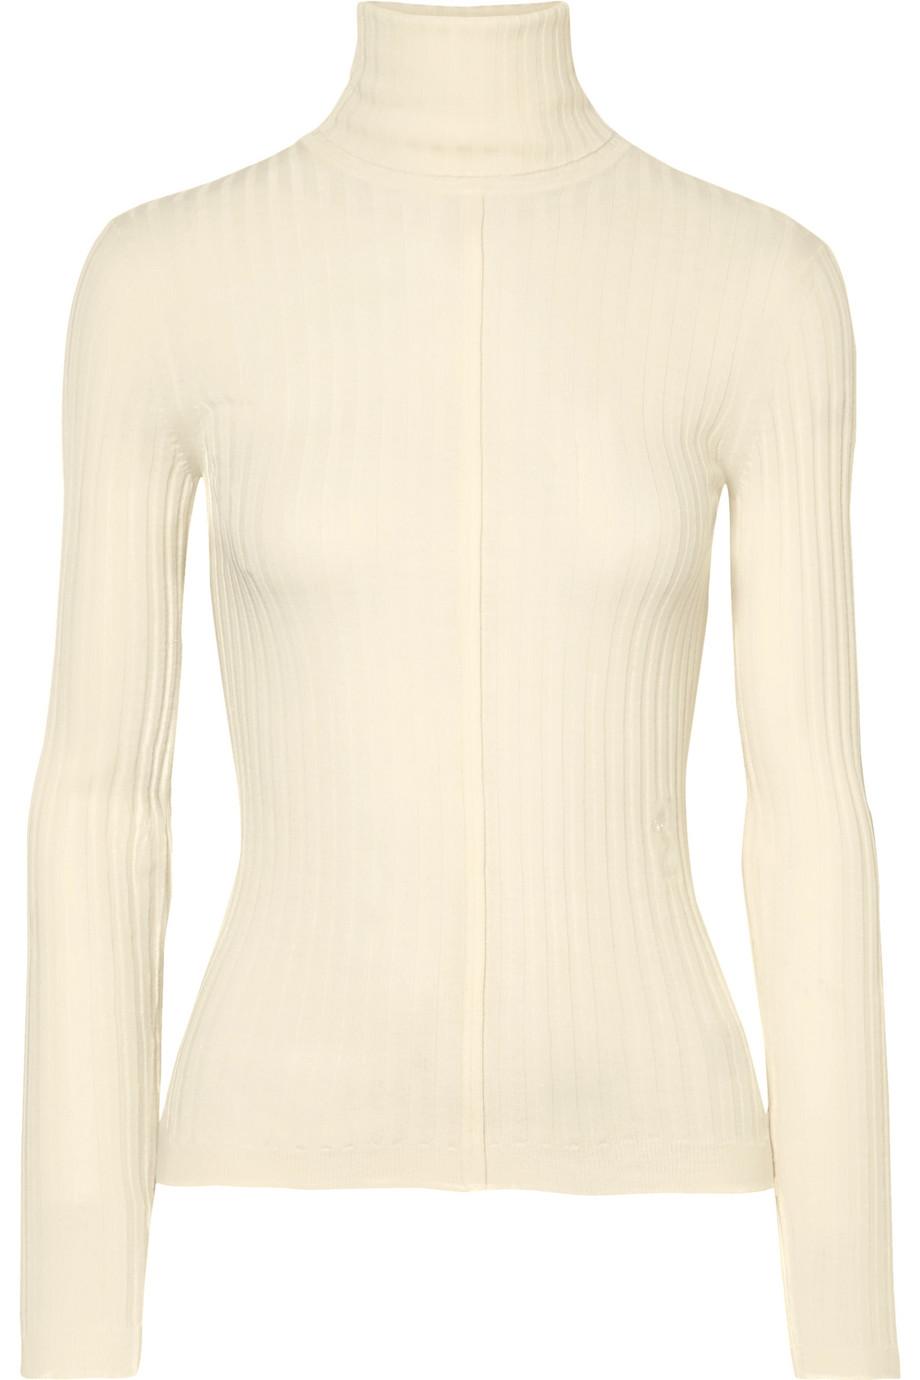 Chloé Ribbed Wool Turtleneck Sweater